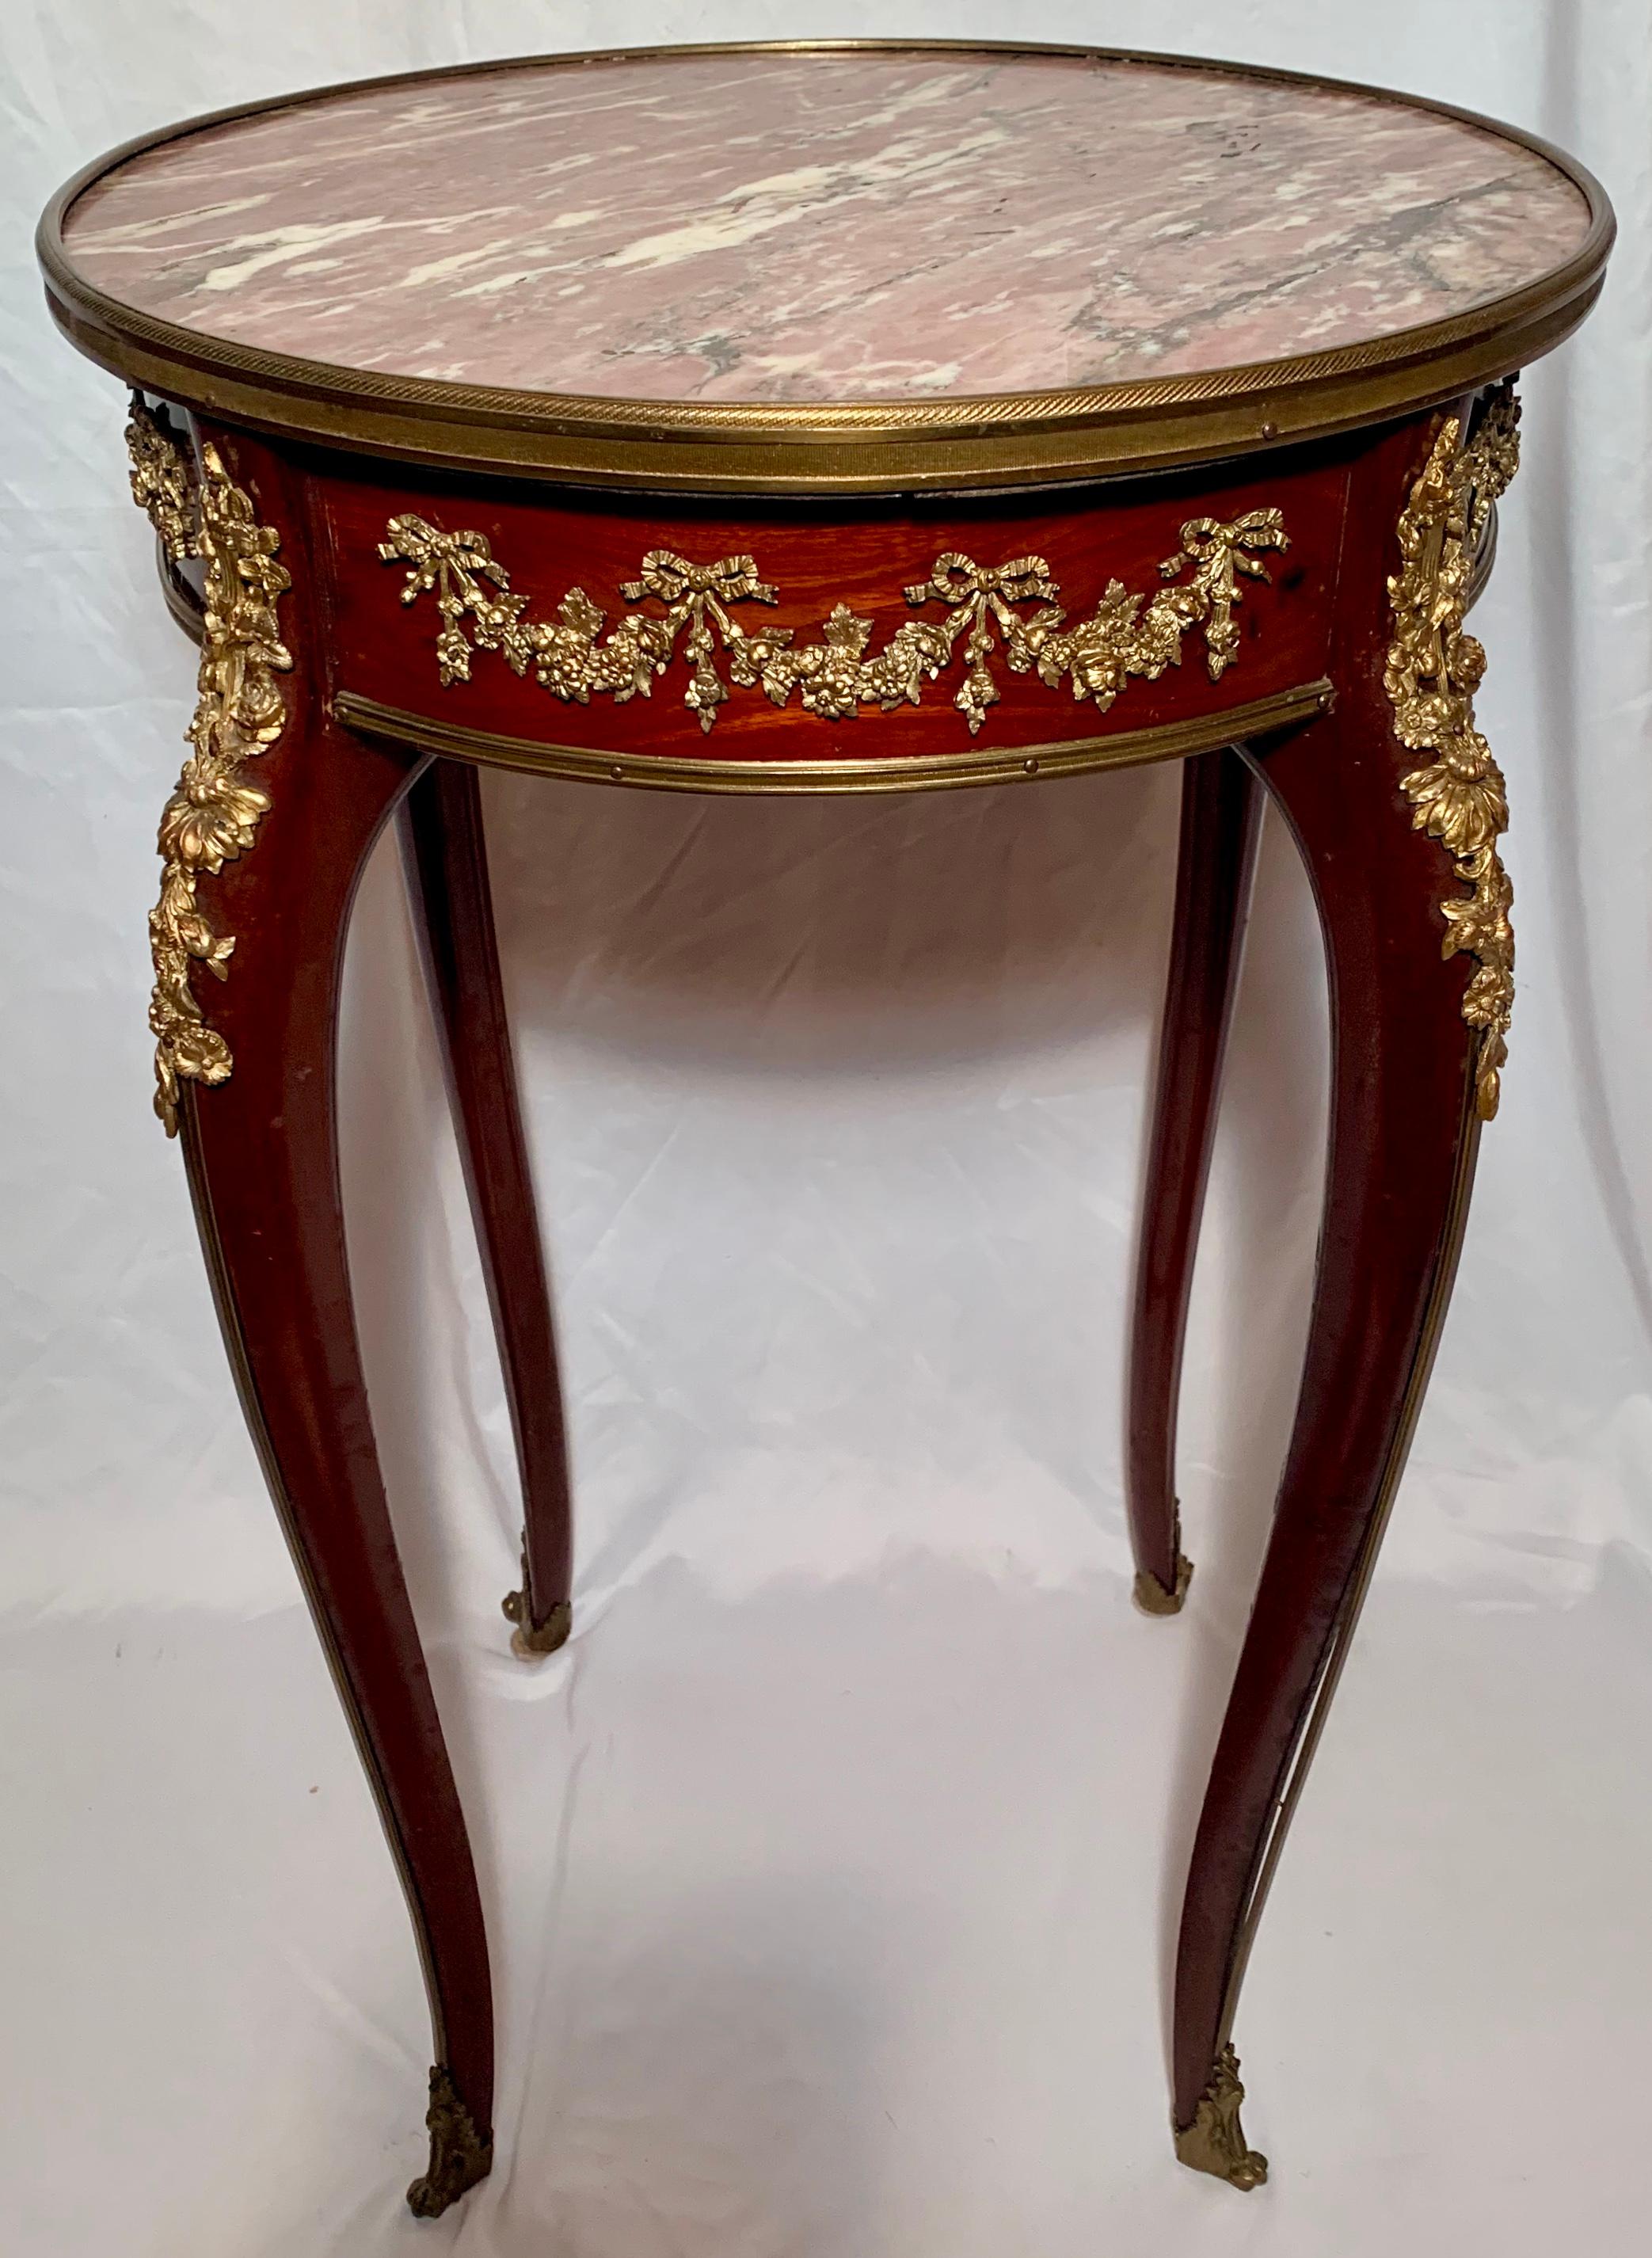 Antique French mahogany Breche d'Alep marble-top table with ormolu mounts.
 